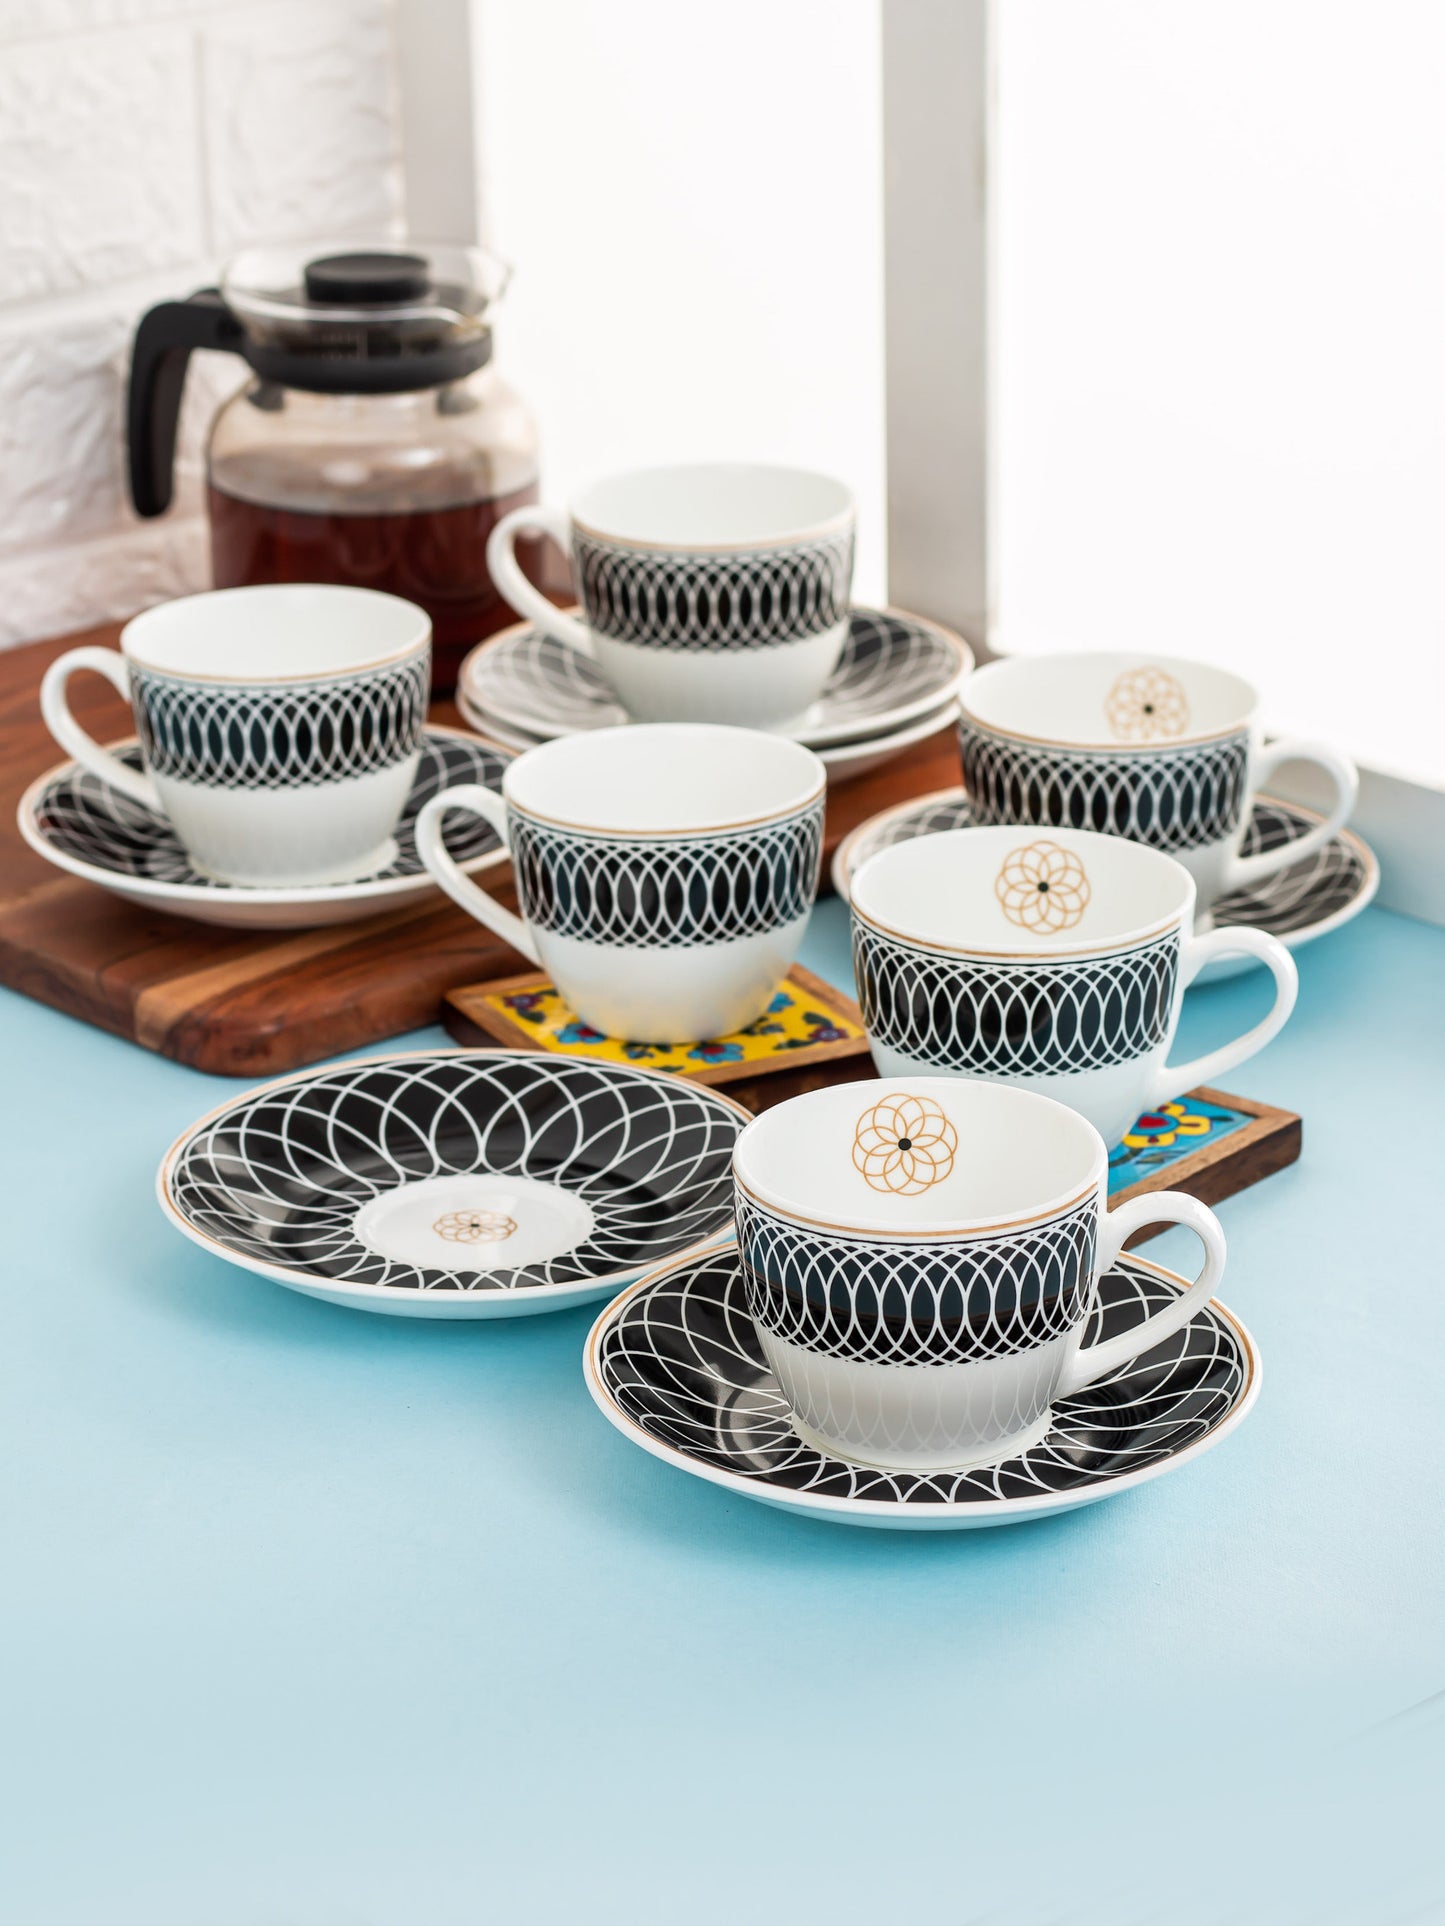 Cream Super Cup & Saucer, 210ml, Set of 12 (6 Cups + 6 Saucers) (S302)